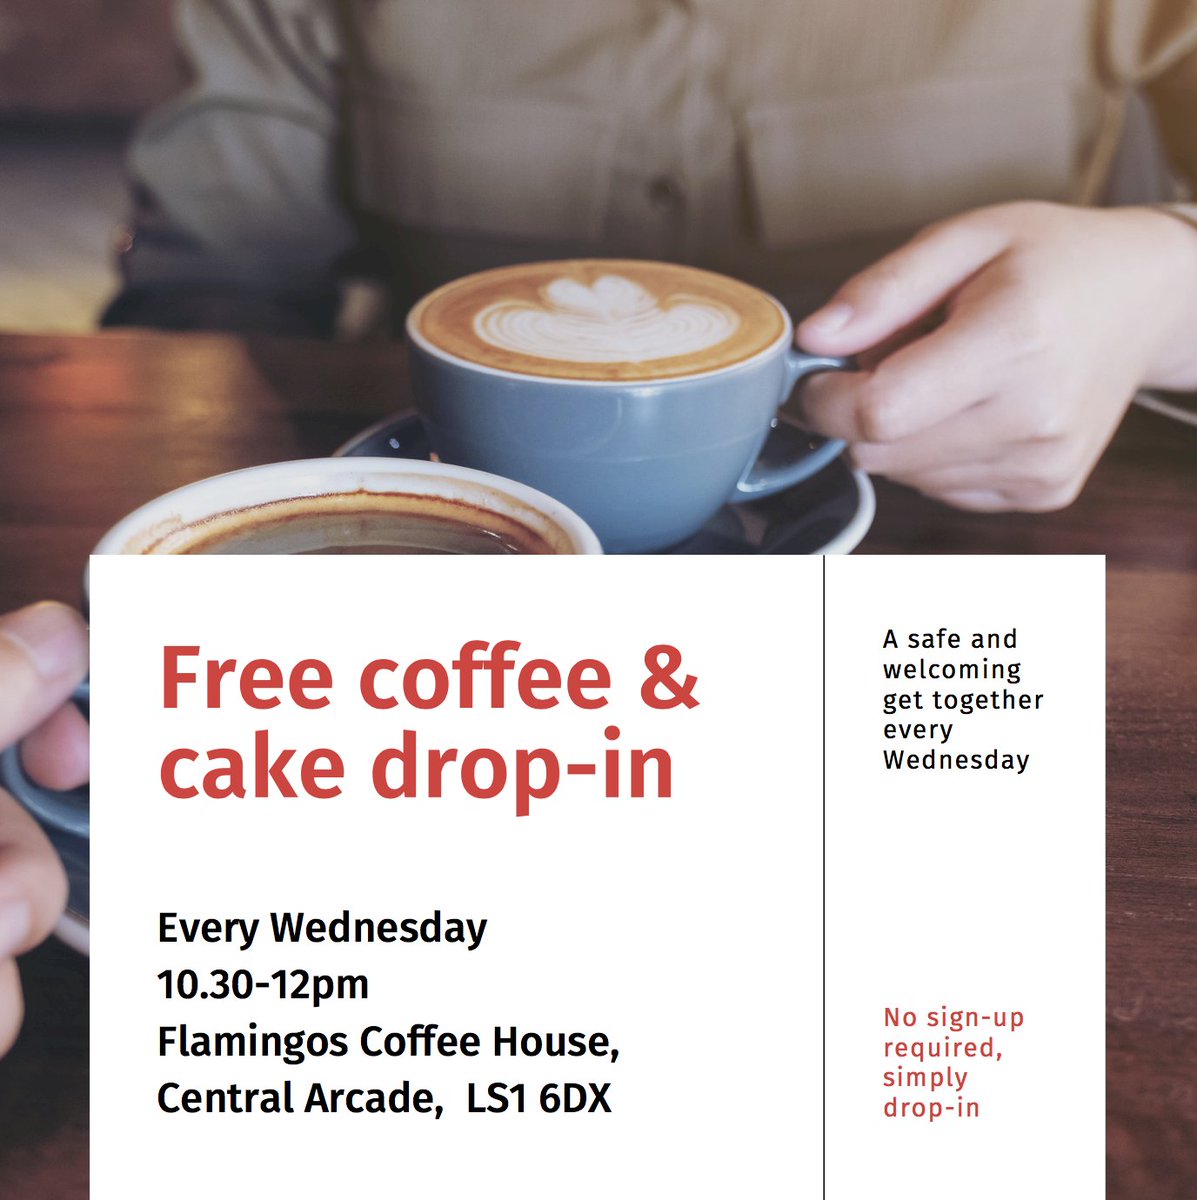 🏳️‍🌈 Ready to meet some amazing people and a new welcoming community of like minded friends? Look no further! ☕ Join us every week for our meet up at Flamingos Coffee House in Leeds. Every Wednesday 10.30-12 for delicious cakes & beverages.